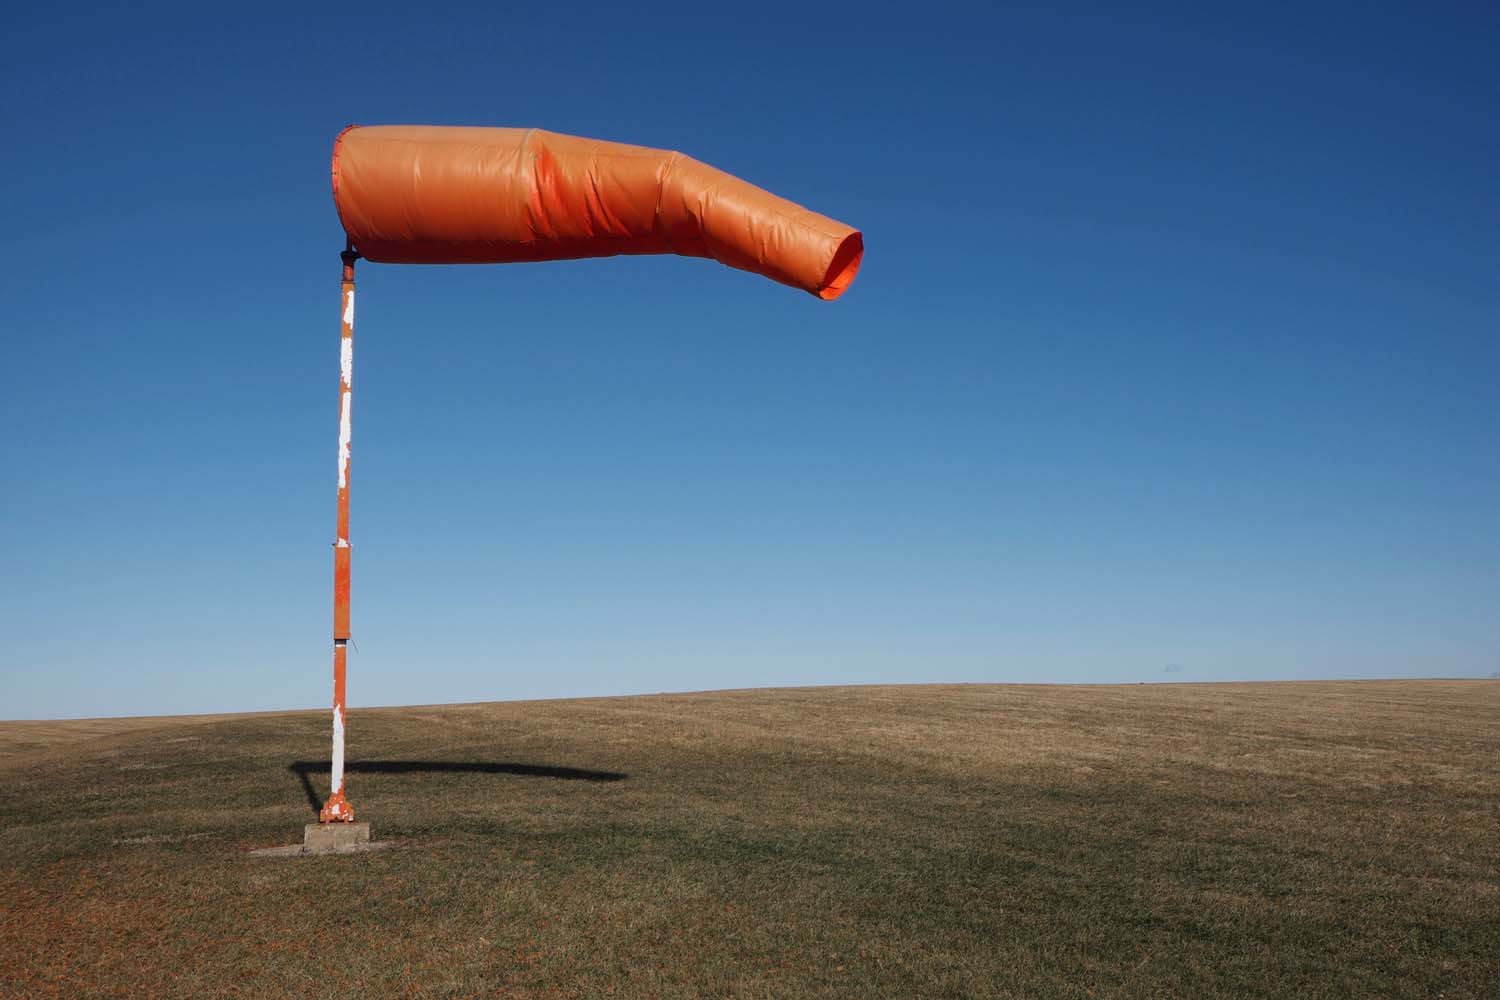  Wind sock at the Canton Ingersoll Airport. Canton, IL. January, 2017 